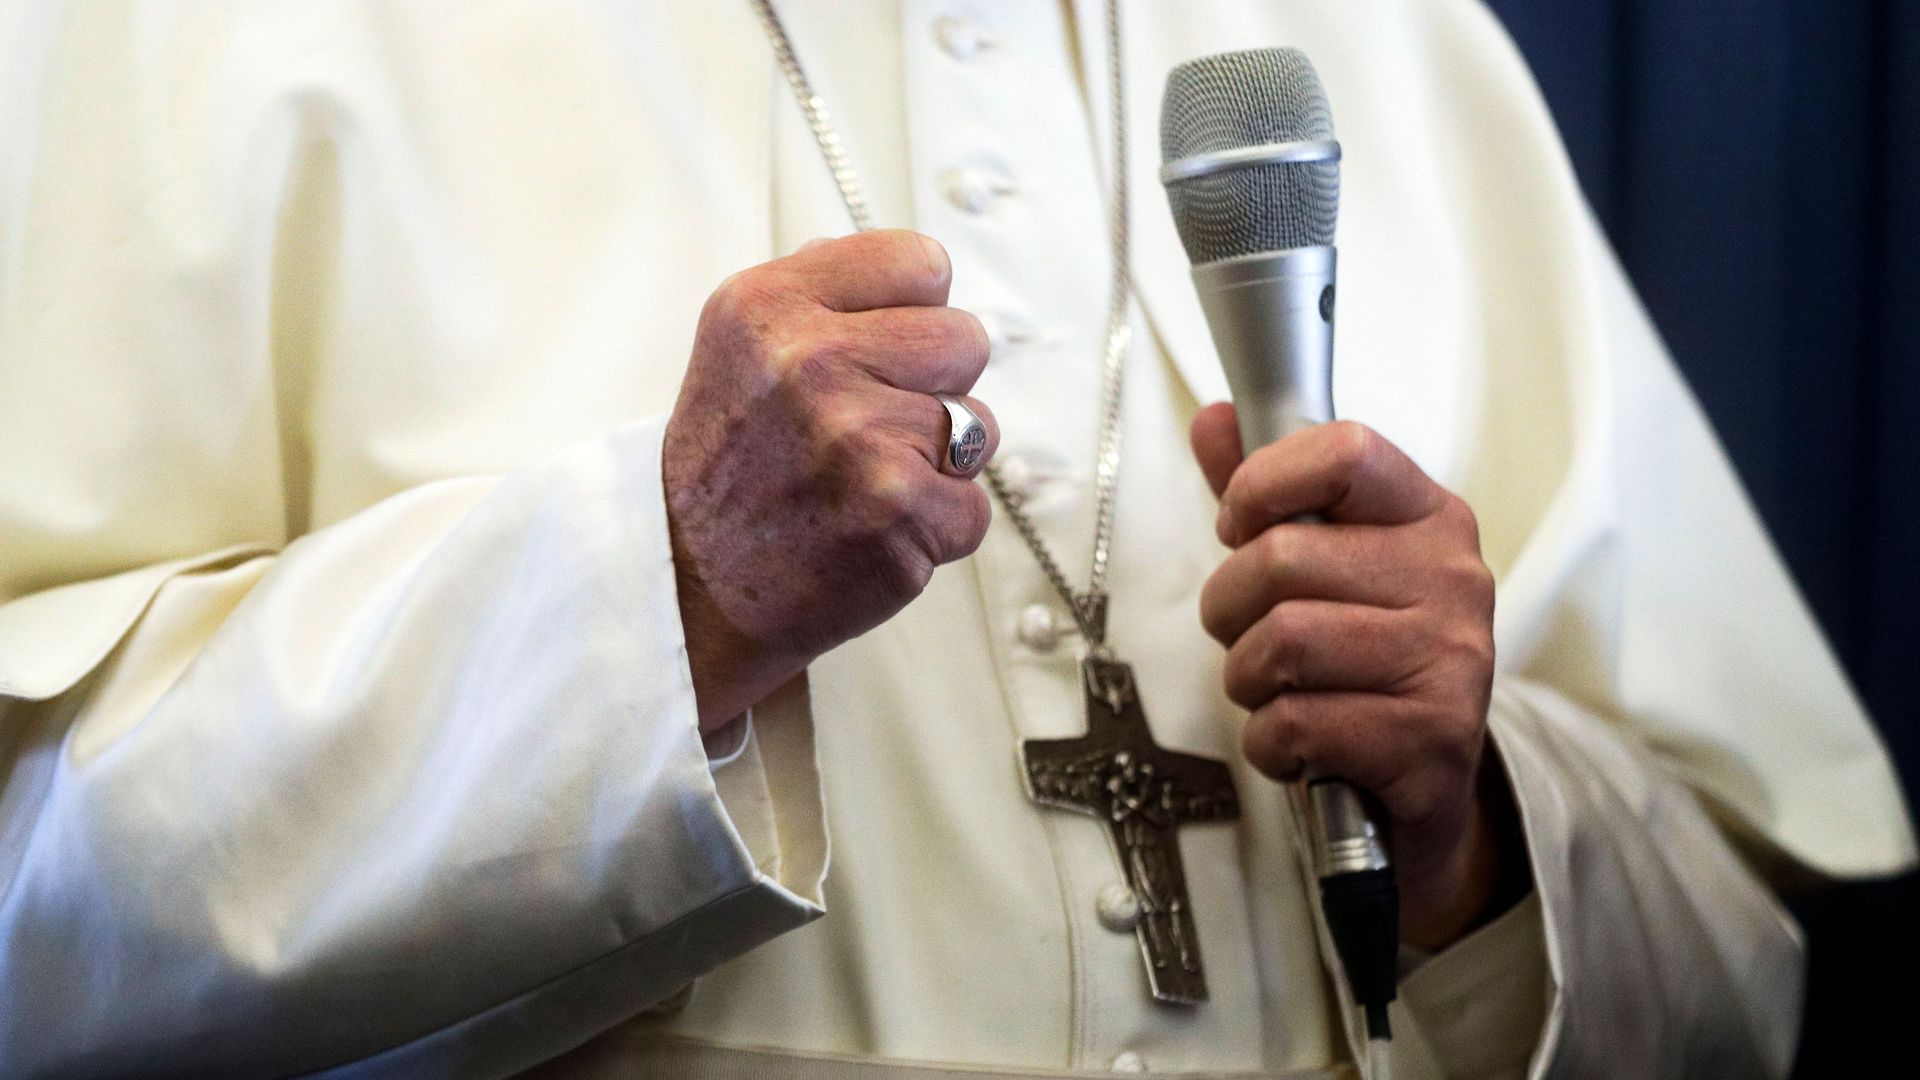 A shot of the pope's hands and robes, but not his face. One hand is in a fist, one hand holds a microphone. A crucifix necklace hangs on his white robes. 